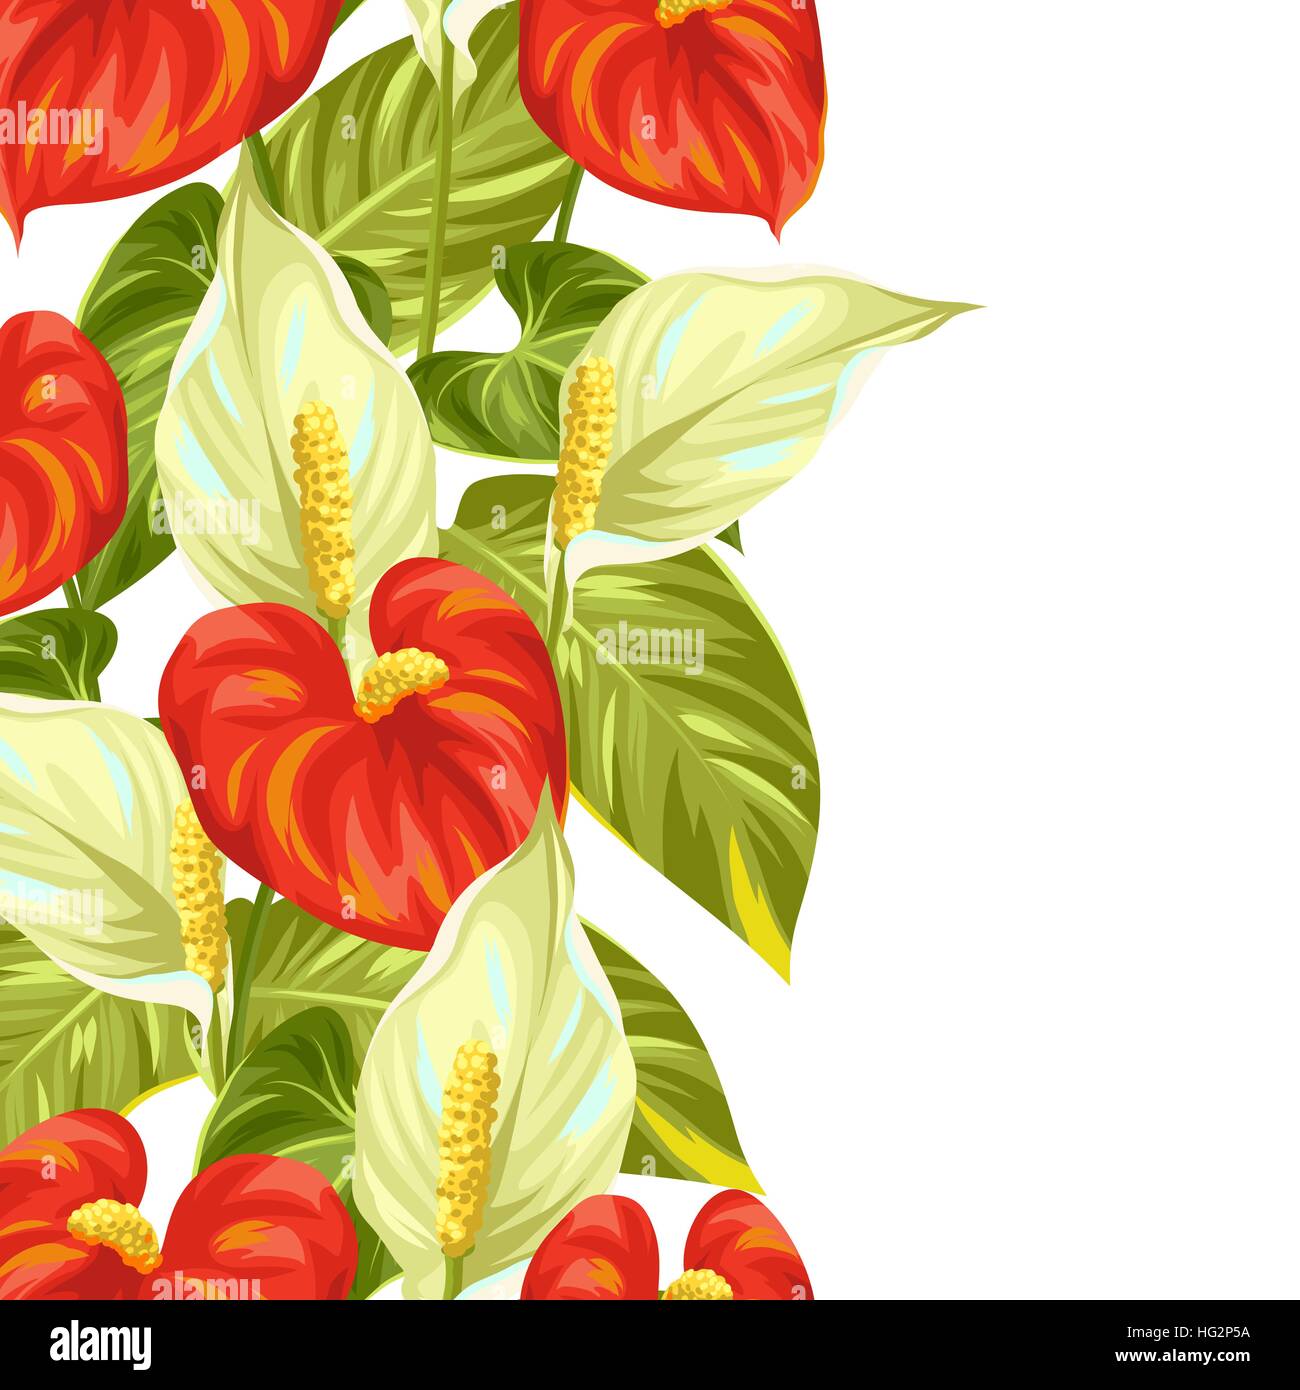 Seamless border with flowers spathiphyllum and anthurium Stock Vector